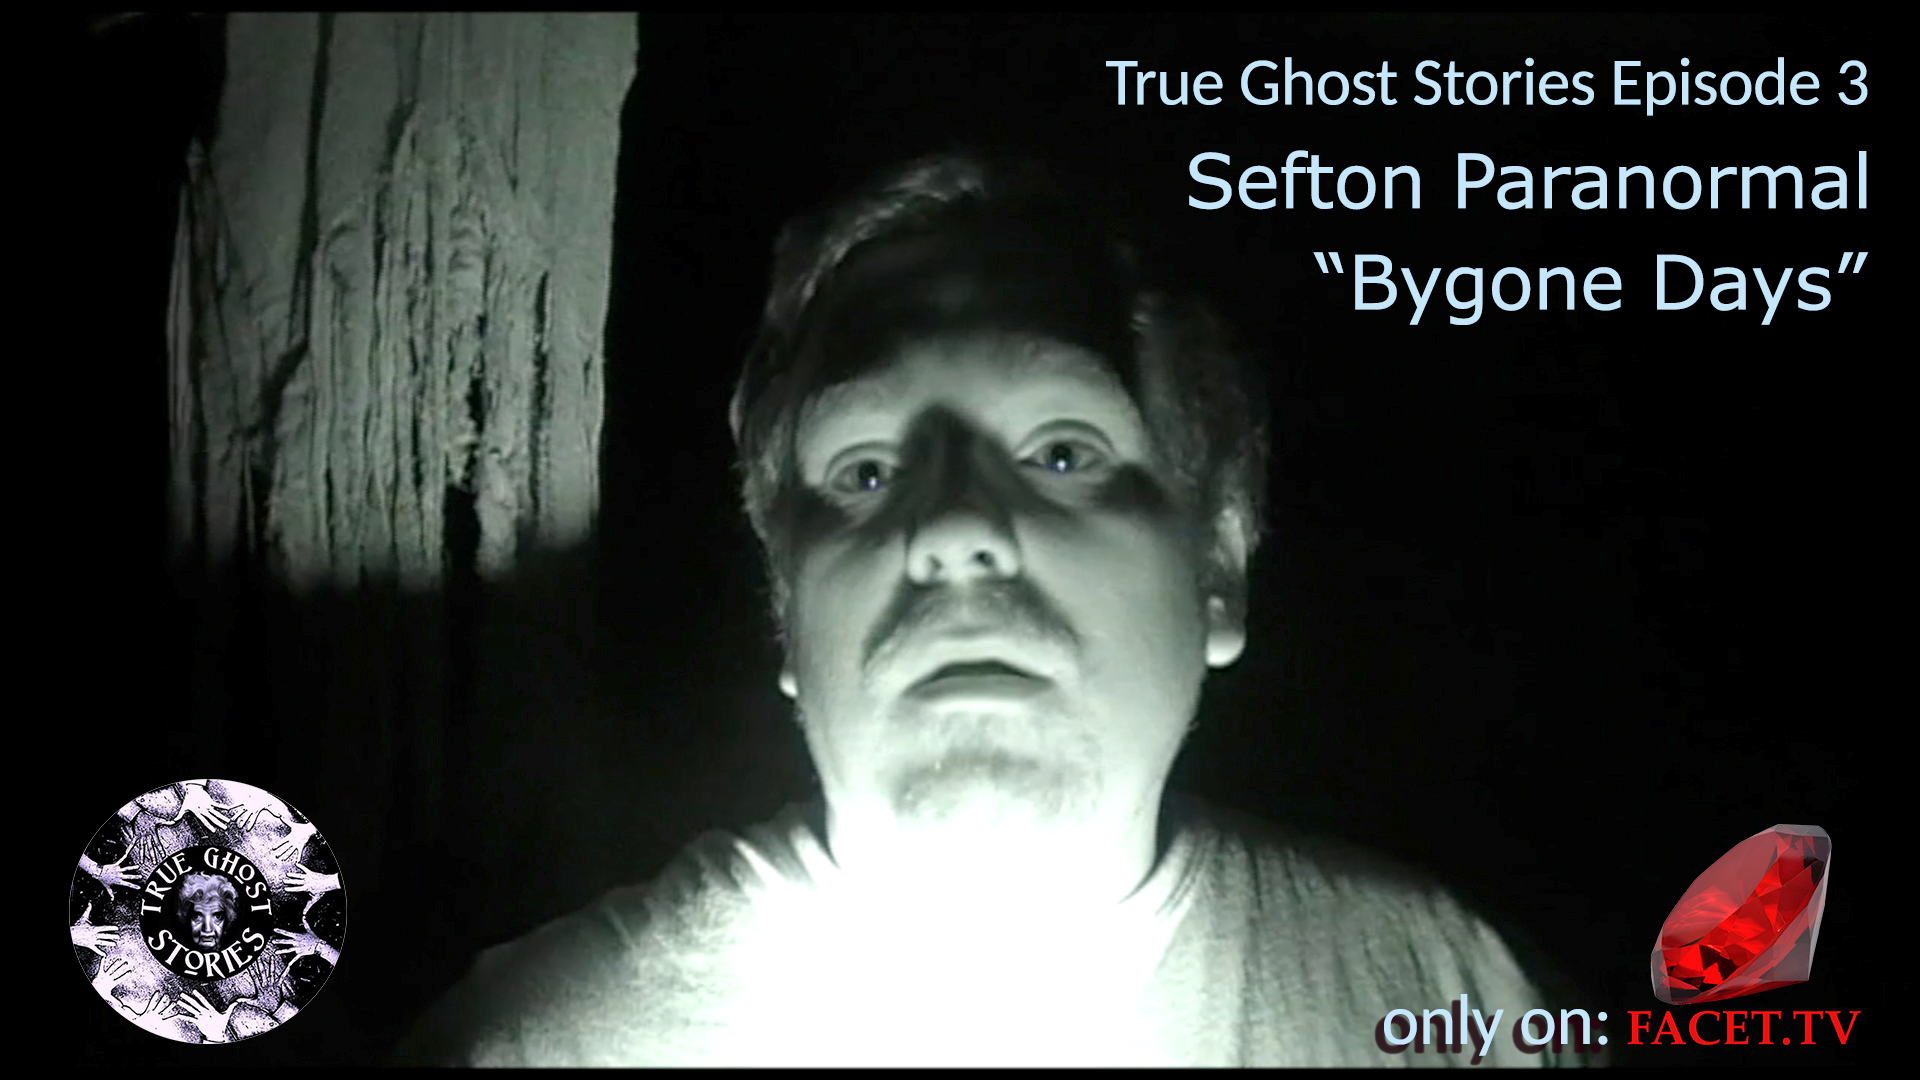 Photo for True Ghost Stories - Season One (all episodes) on ViewStub